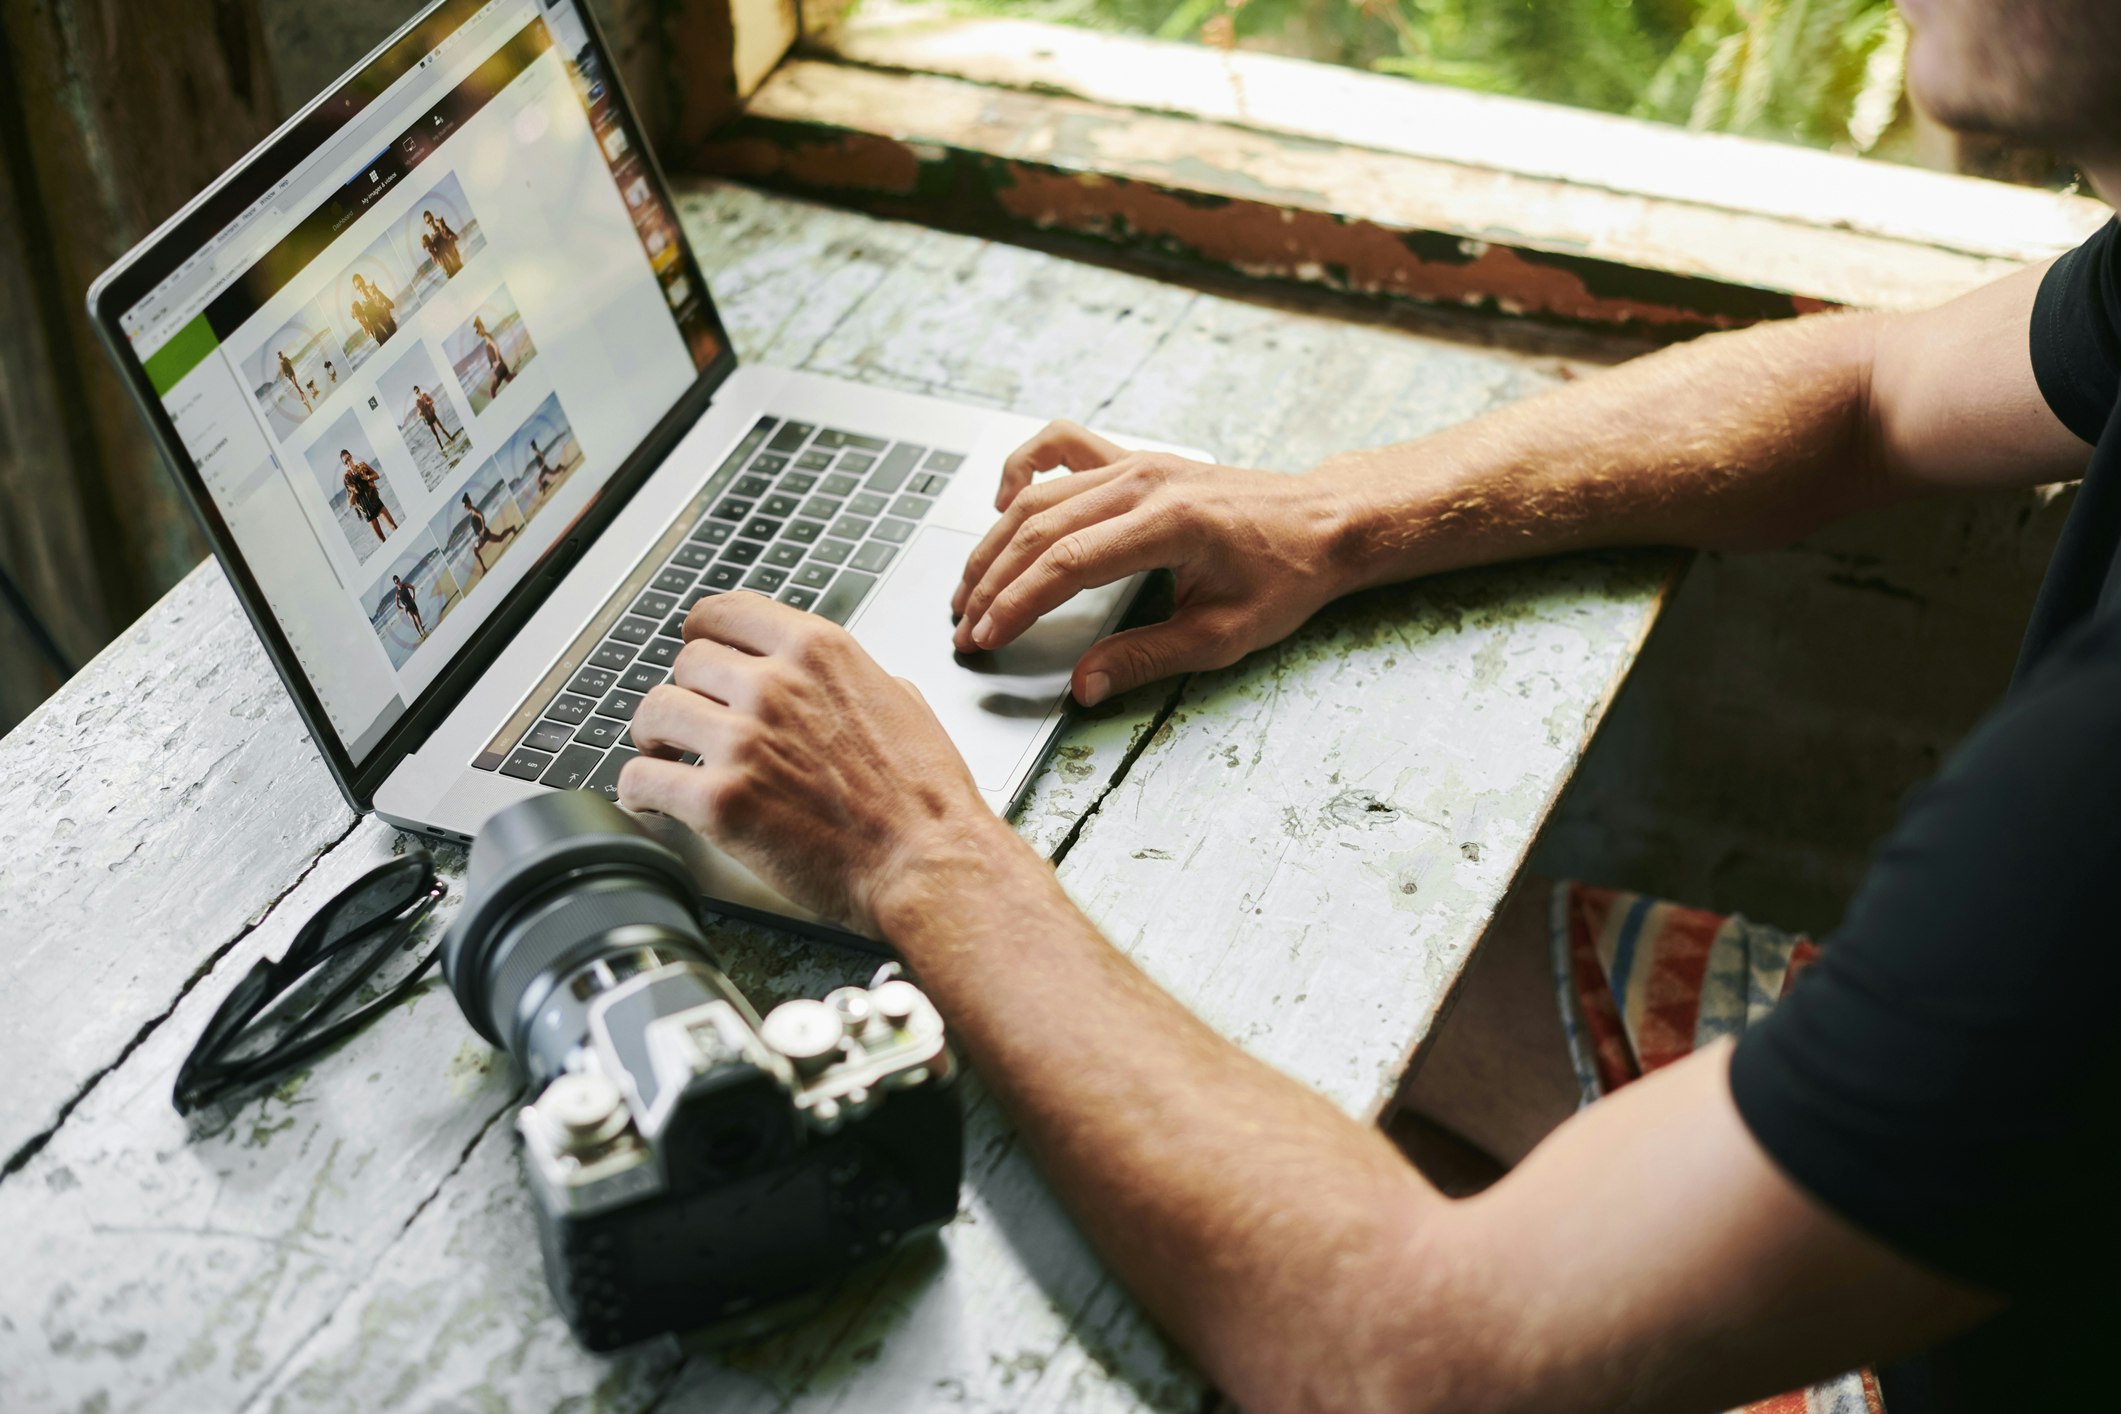 A man is sitting a worn-out table editing photos on a laptop. His camera is sitting next to the laptop on the desk. 